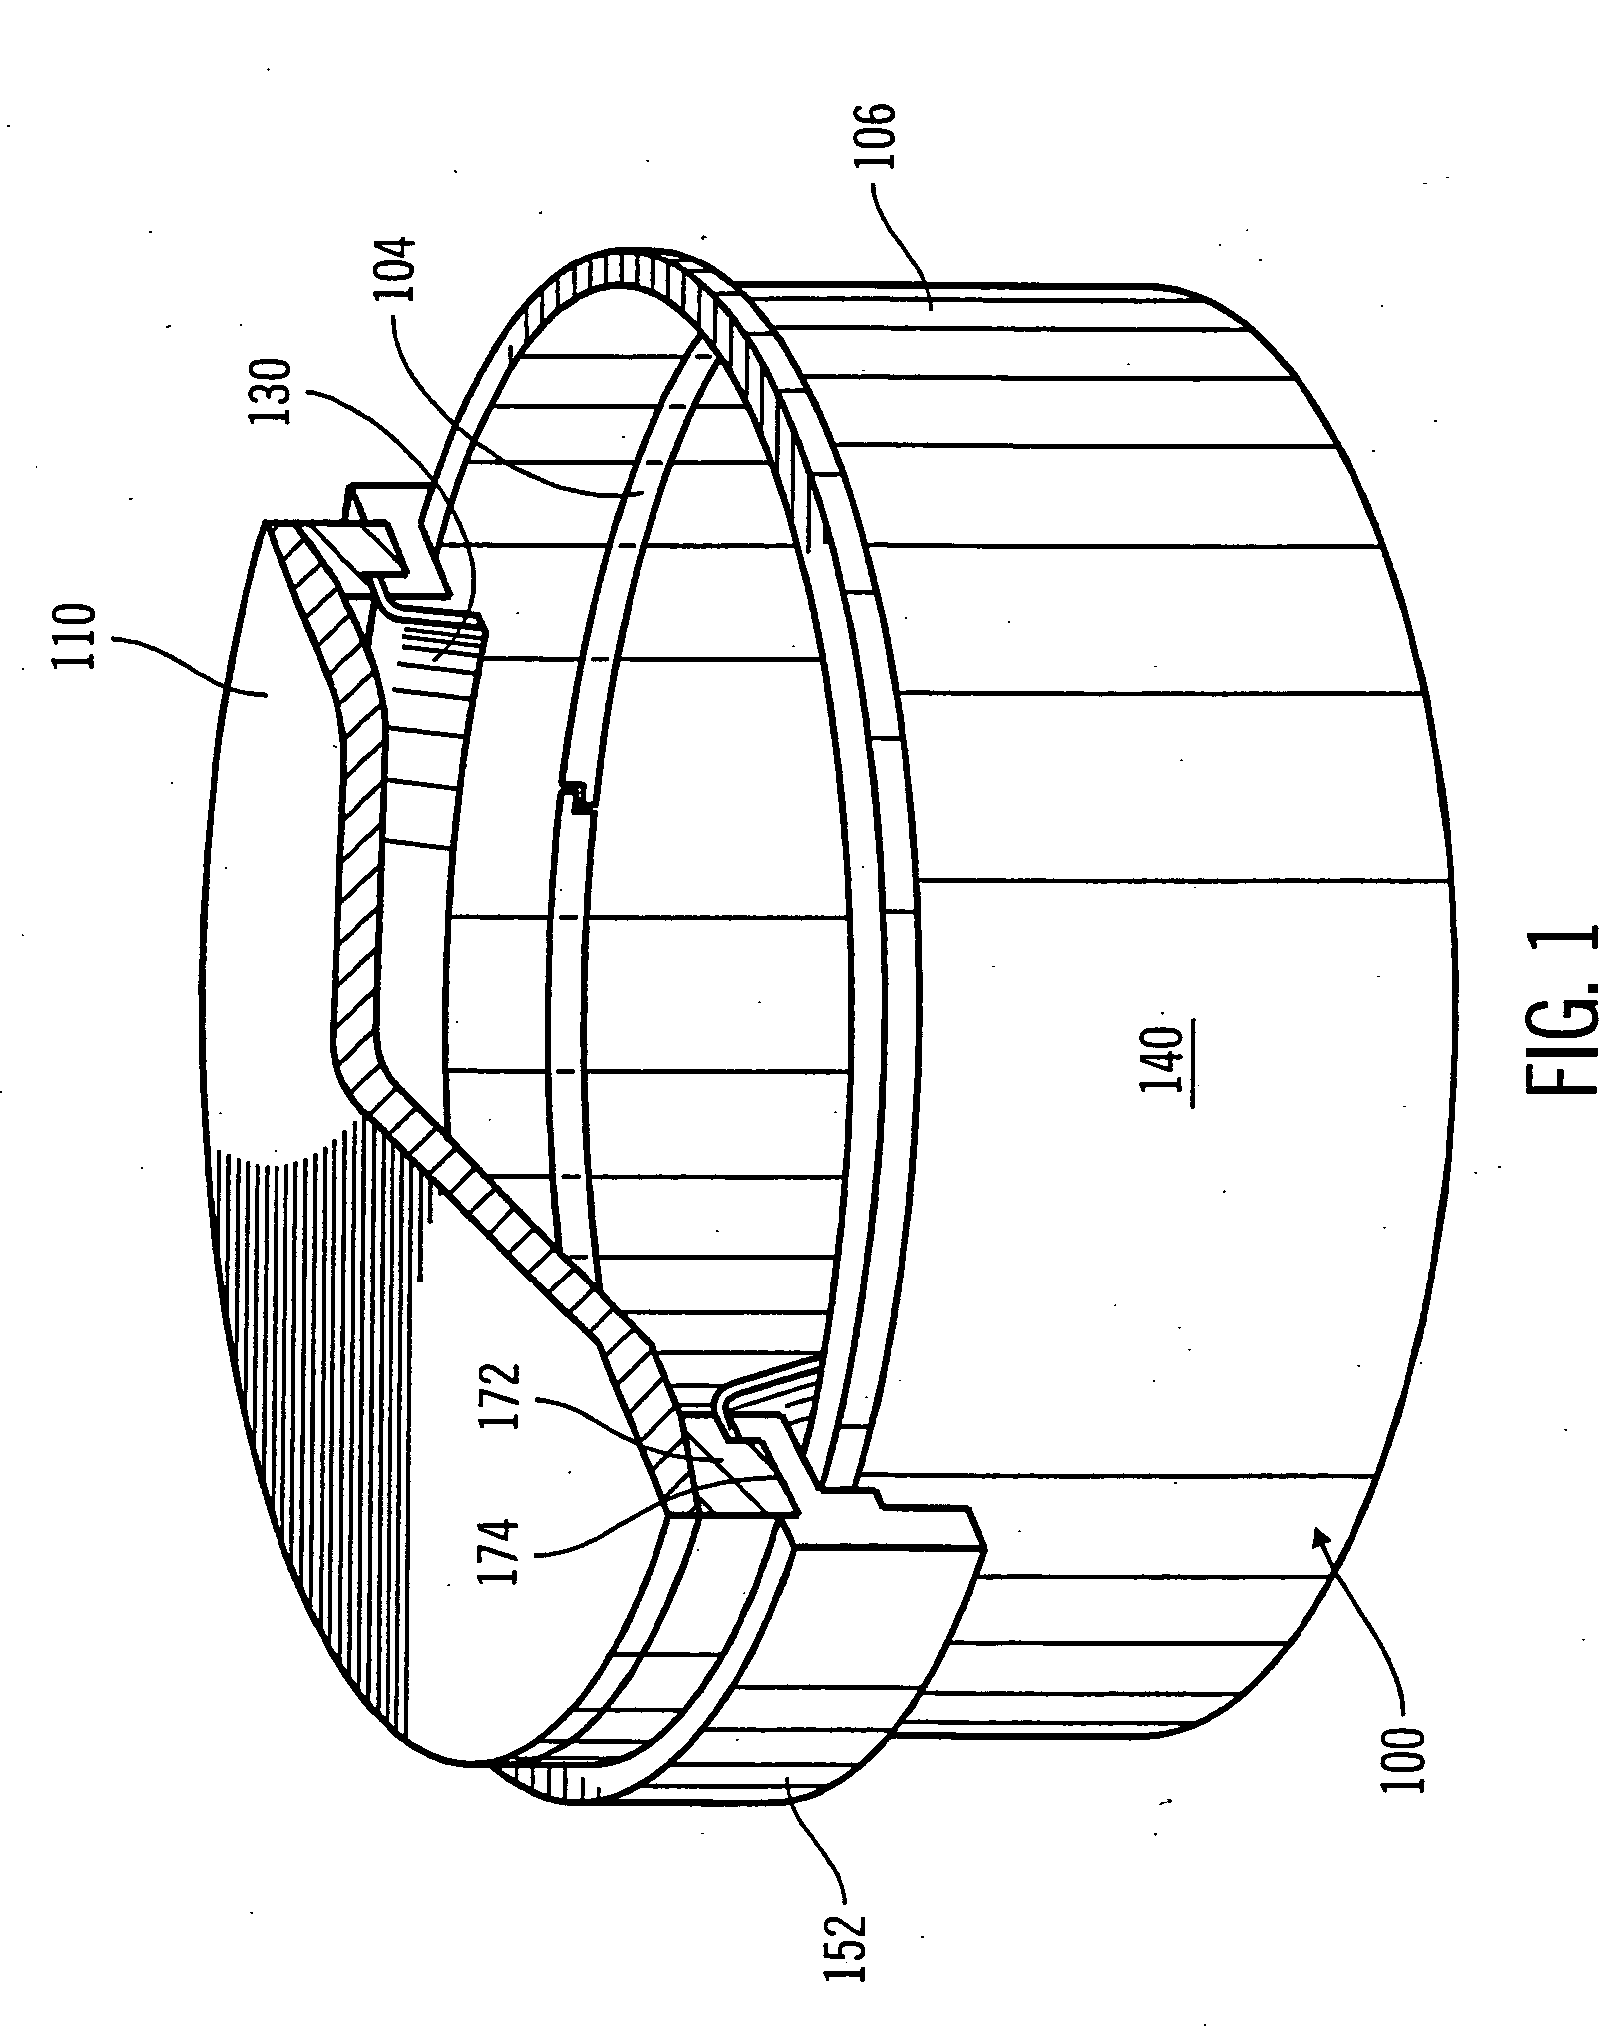 Coil and coil support for generating a plasma